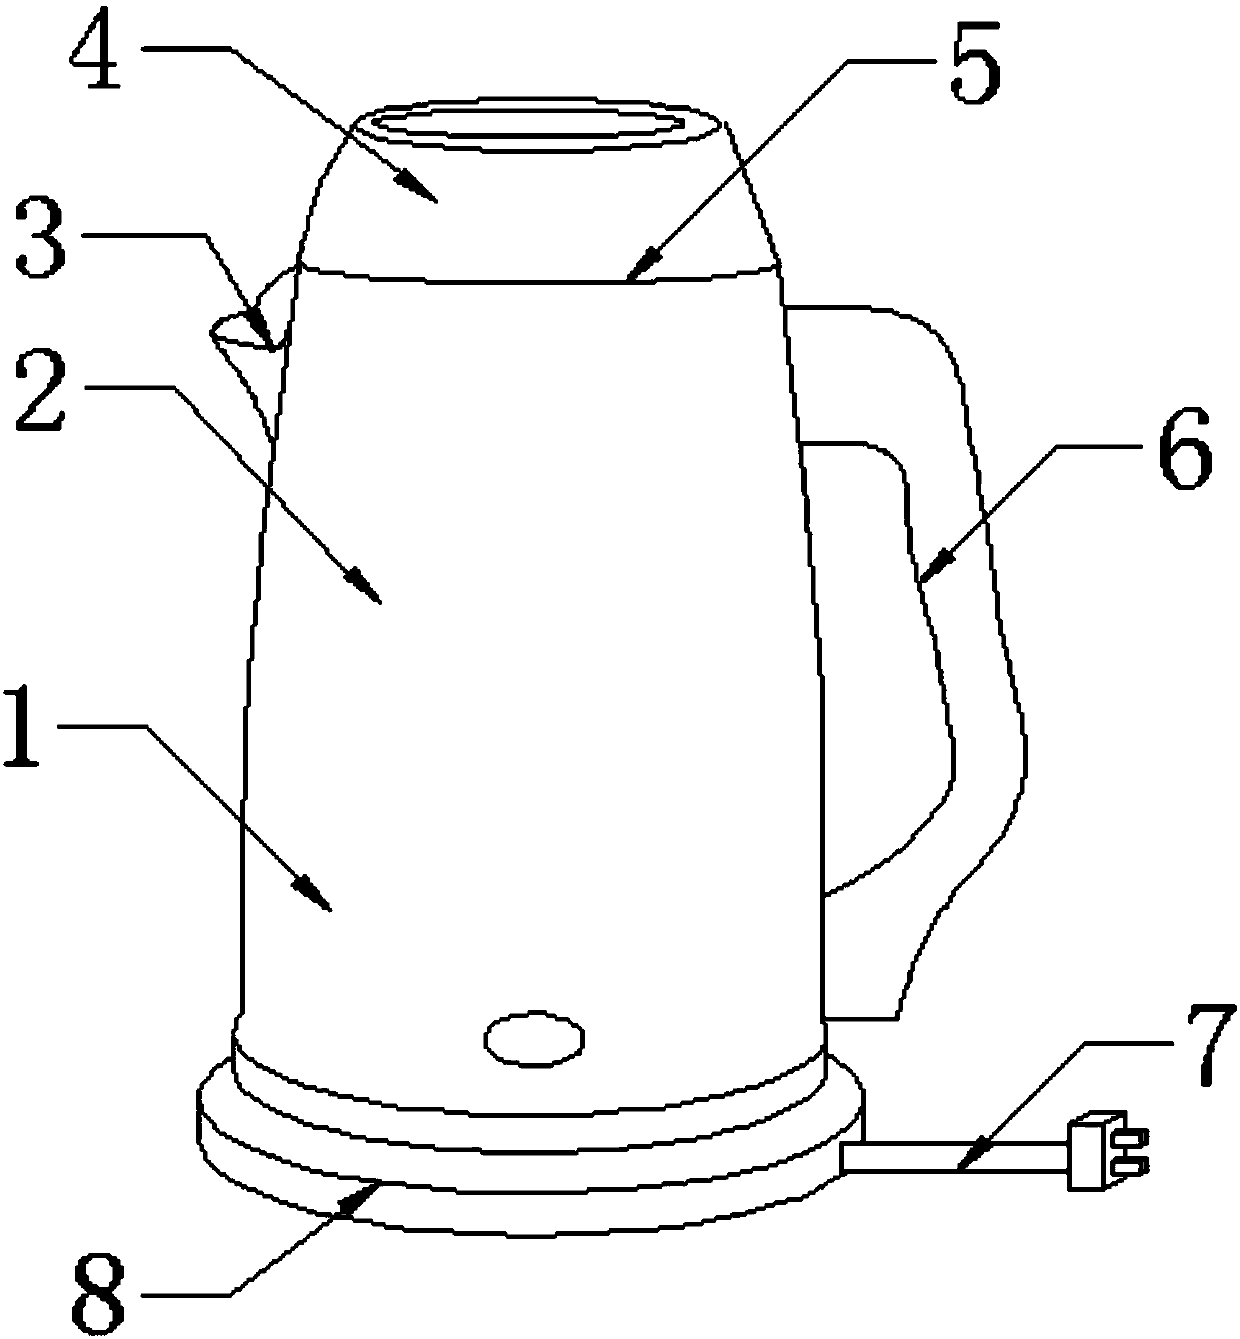 A kettle for preventing steam from escaping